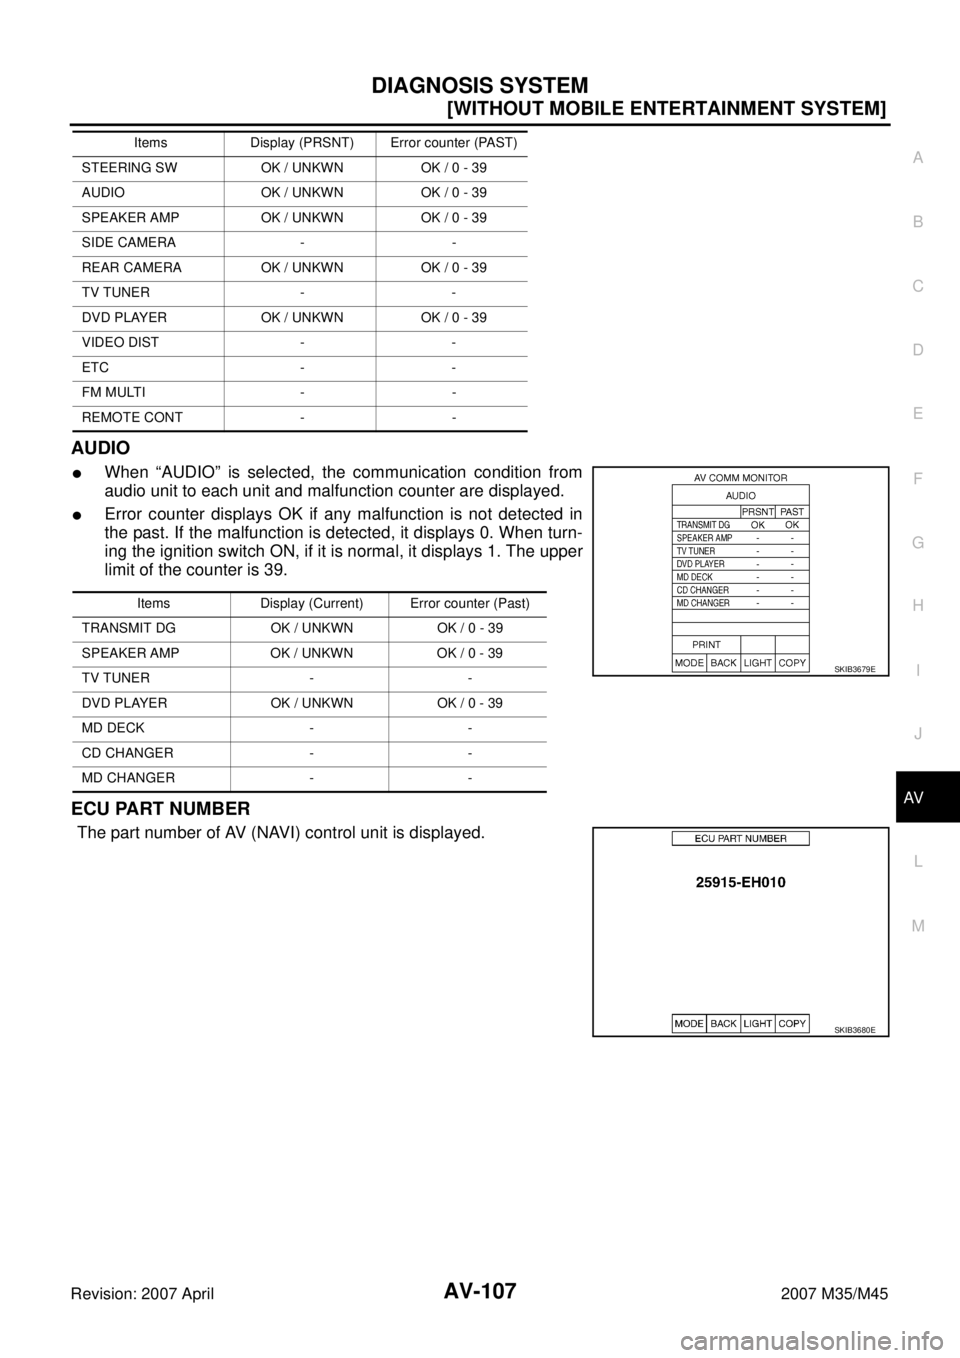 INFINITI M35 2007  Factory Service Manual DIAGNOSIS SYSTEM
AV-107
[WITHOUT MOBILE ENTERTAINMENT SYSTEM]
C
D
E
F
G
H
I
J
L
MA
B
AV
Revision: 2007 April2007 M35/M45
AUDIO
When “AUDIO” is selected, the communication condition from
audio uni